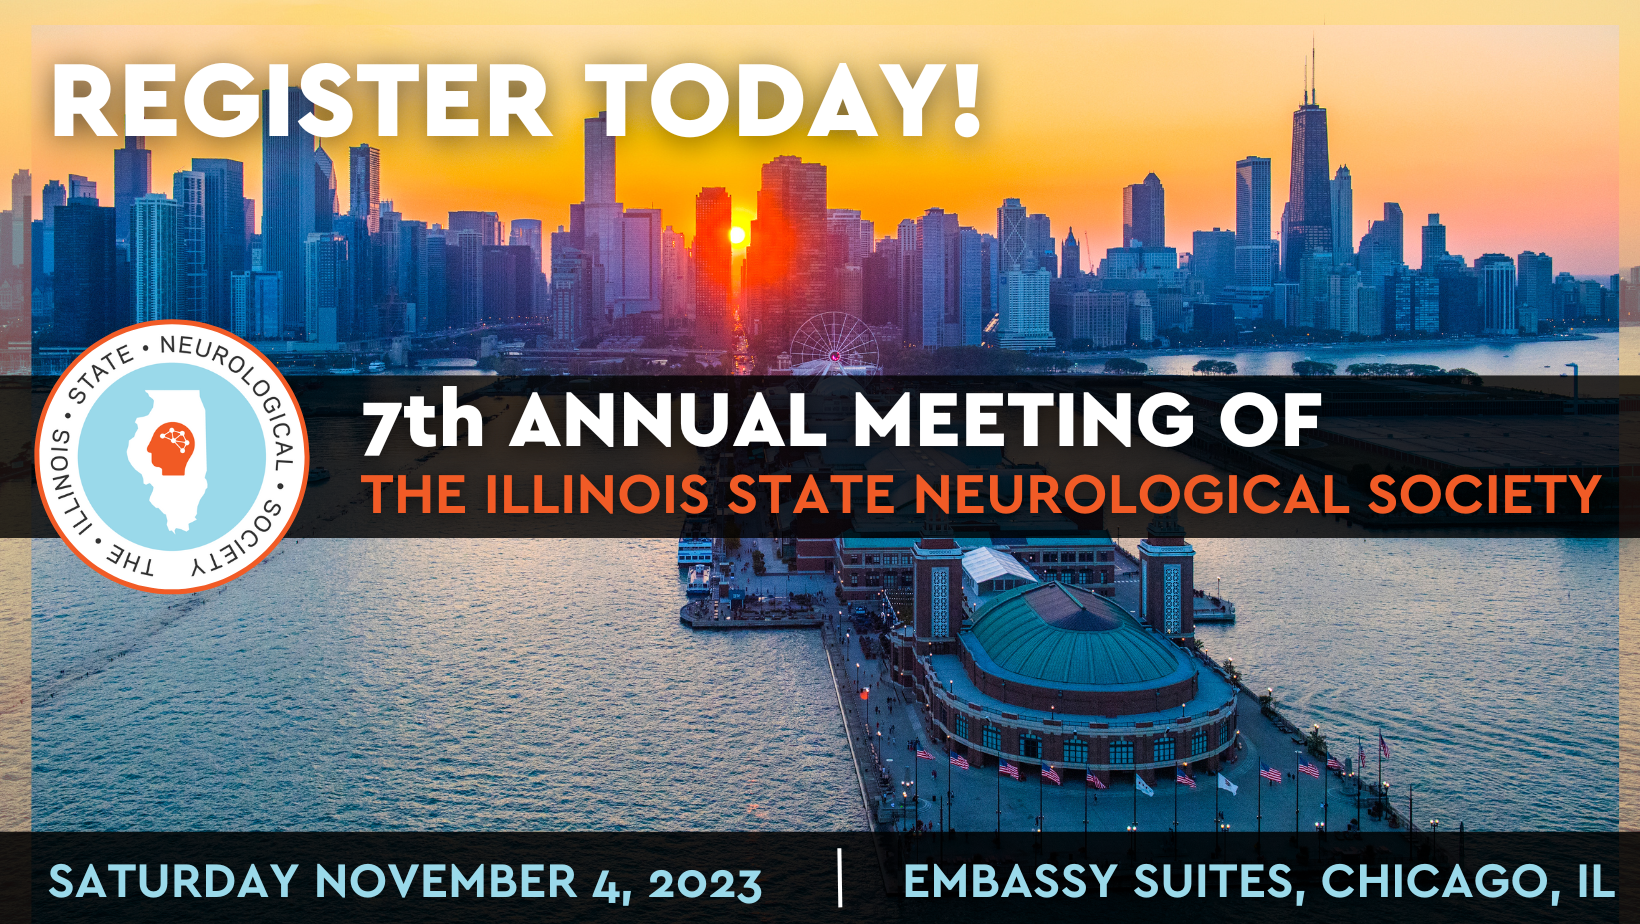 Save the Date for the 7th Annual Meeting of the Illinois State neurological Society